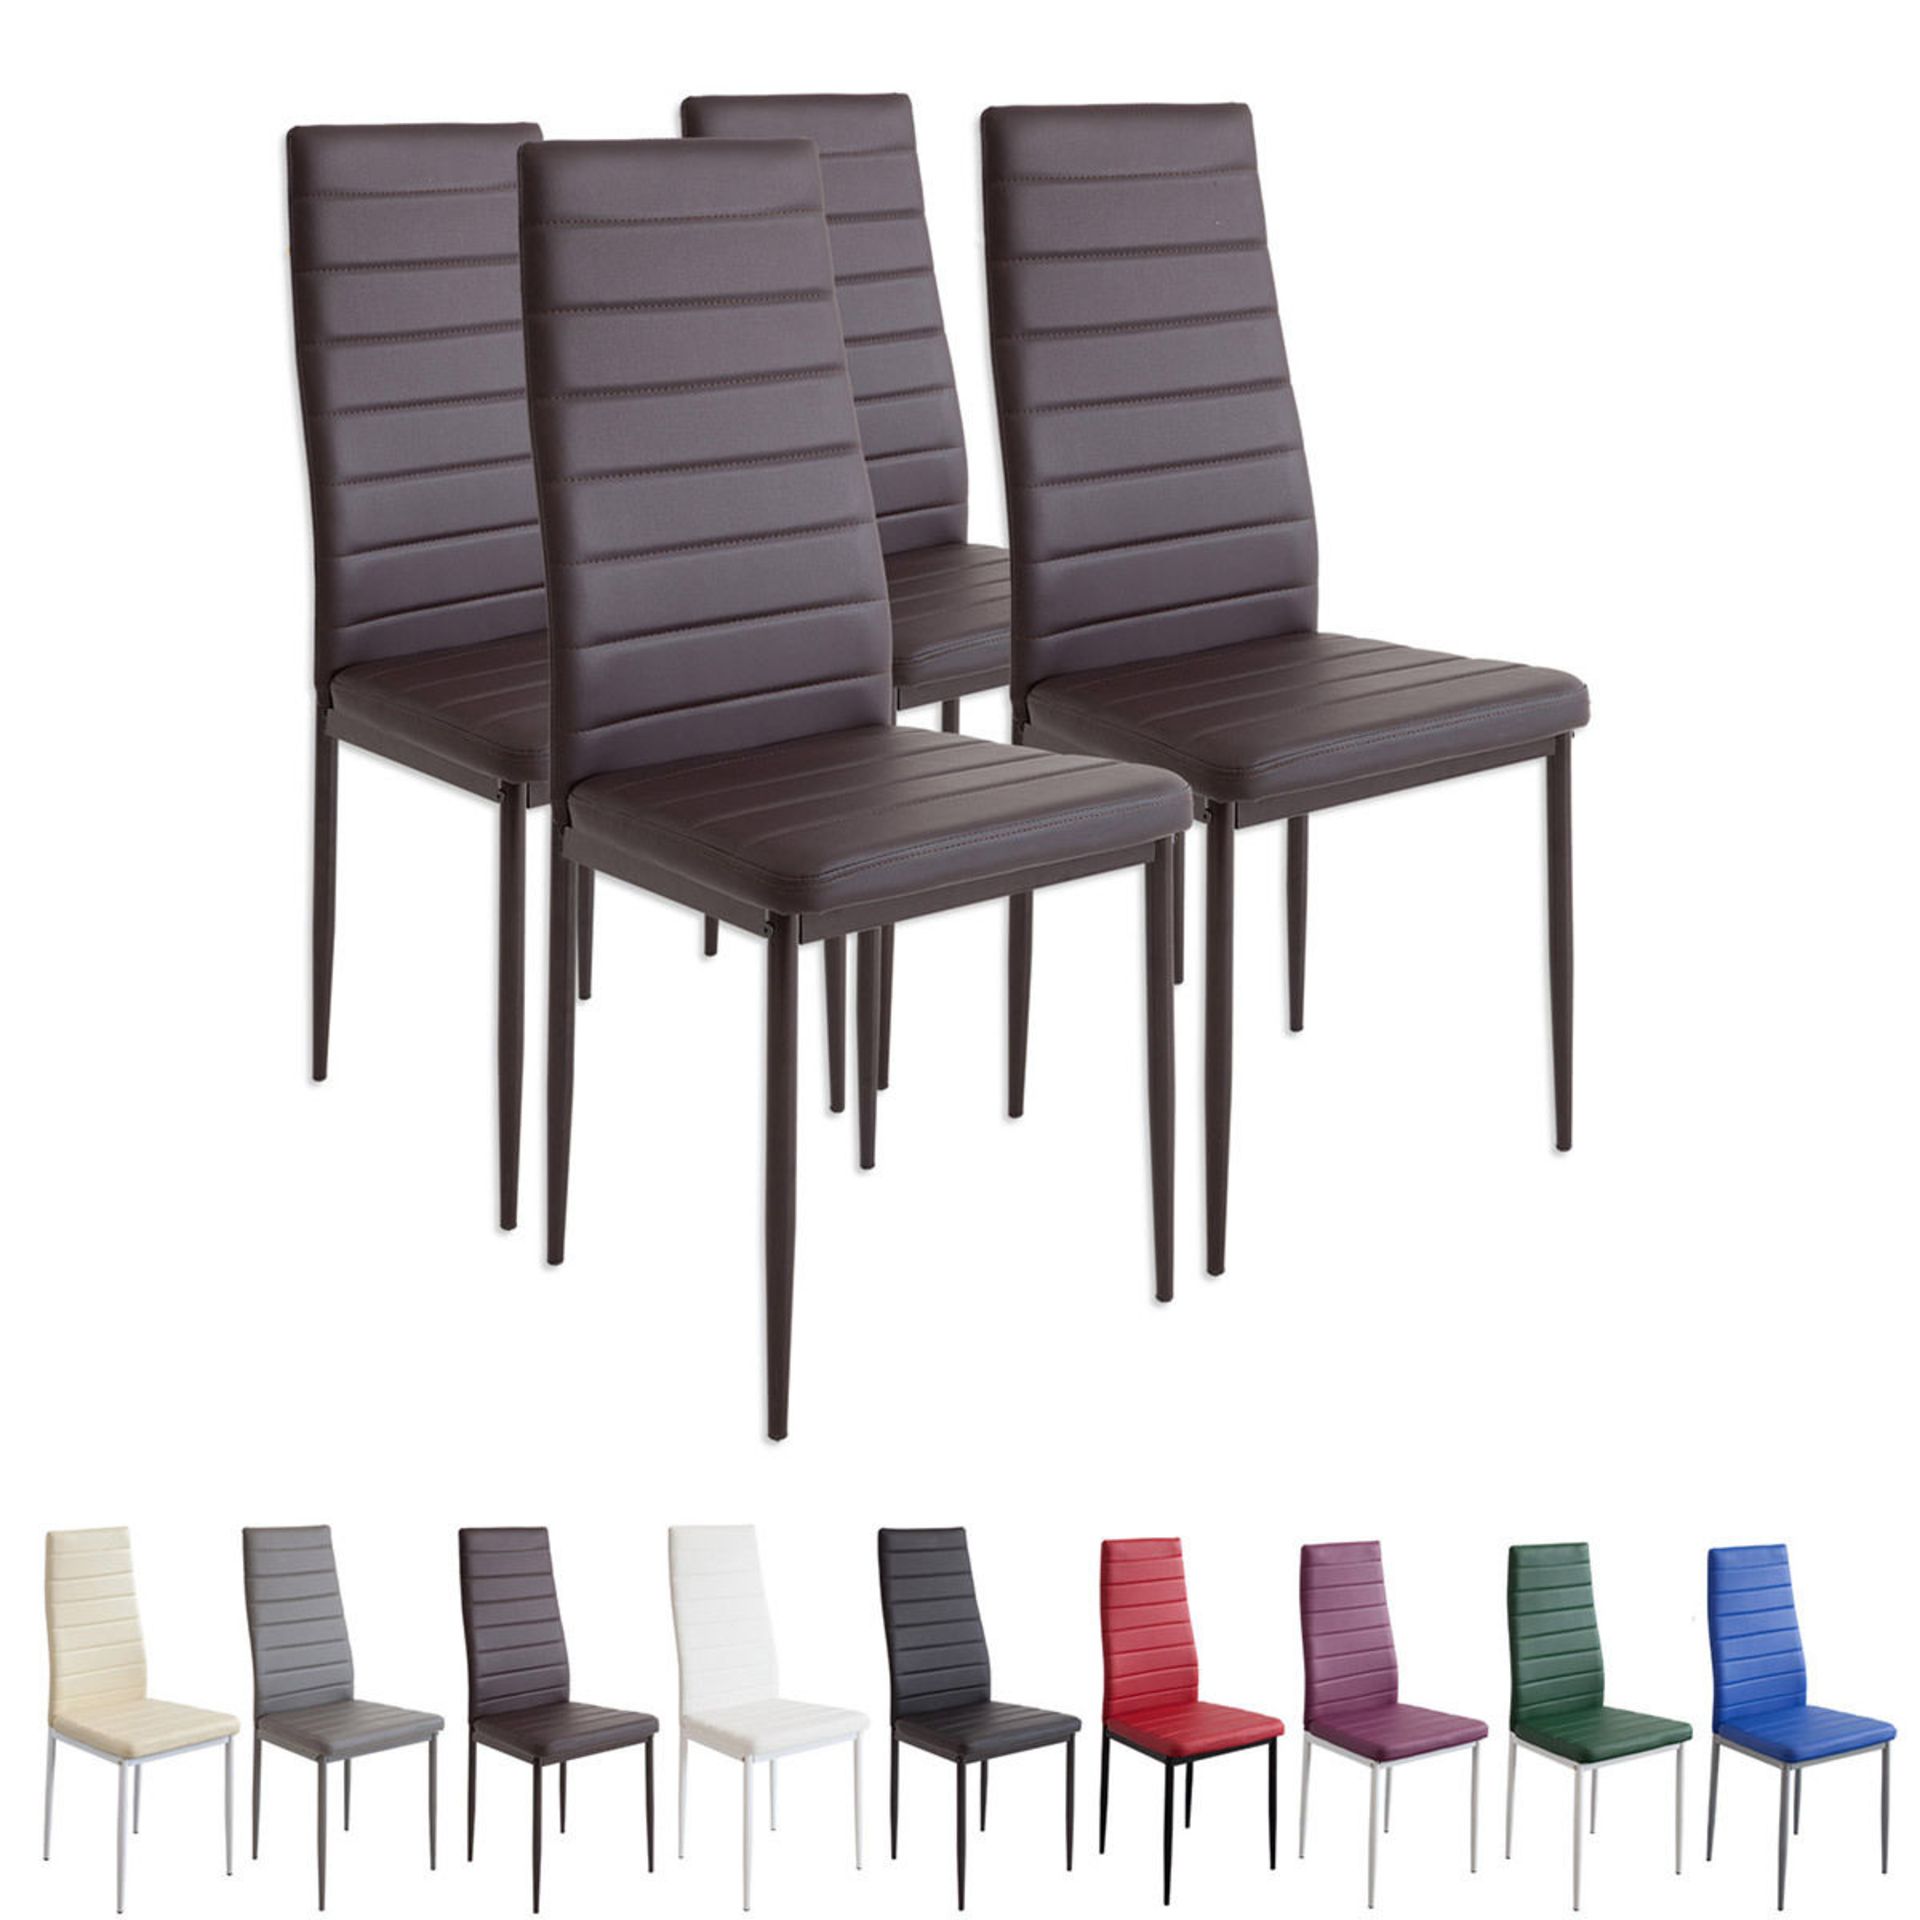 4 x dining chairs MILANO - brown